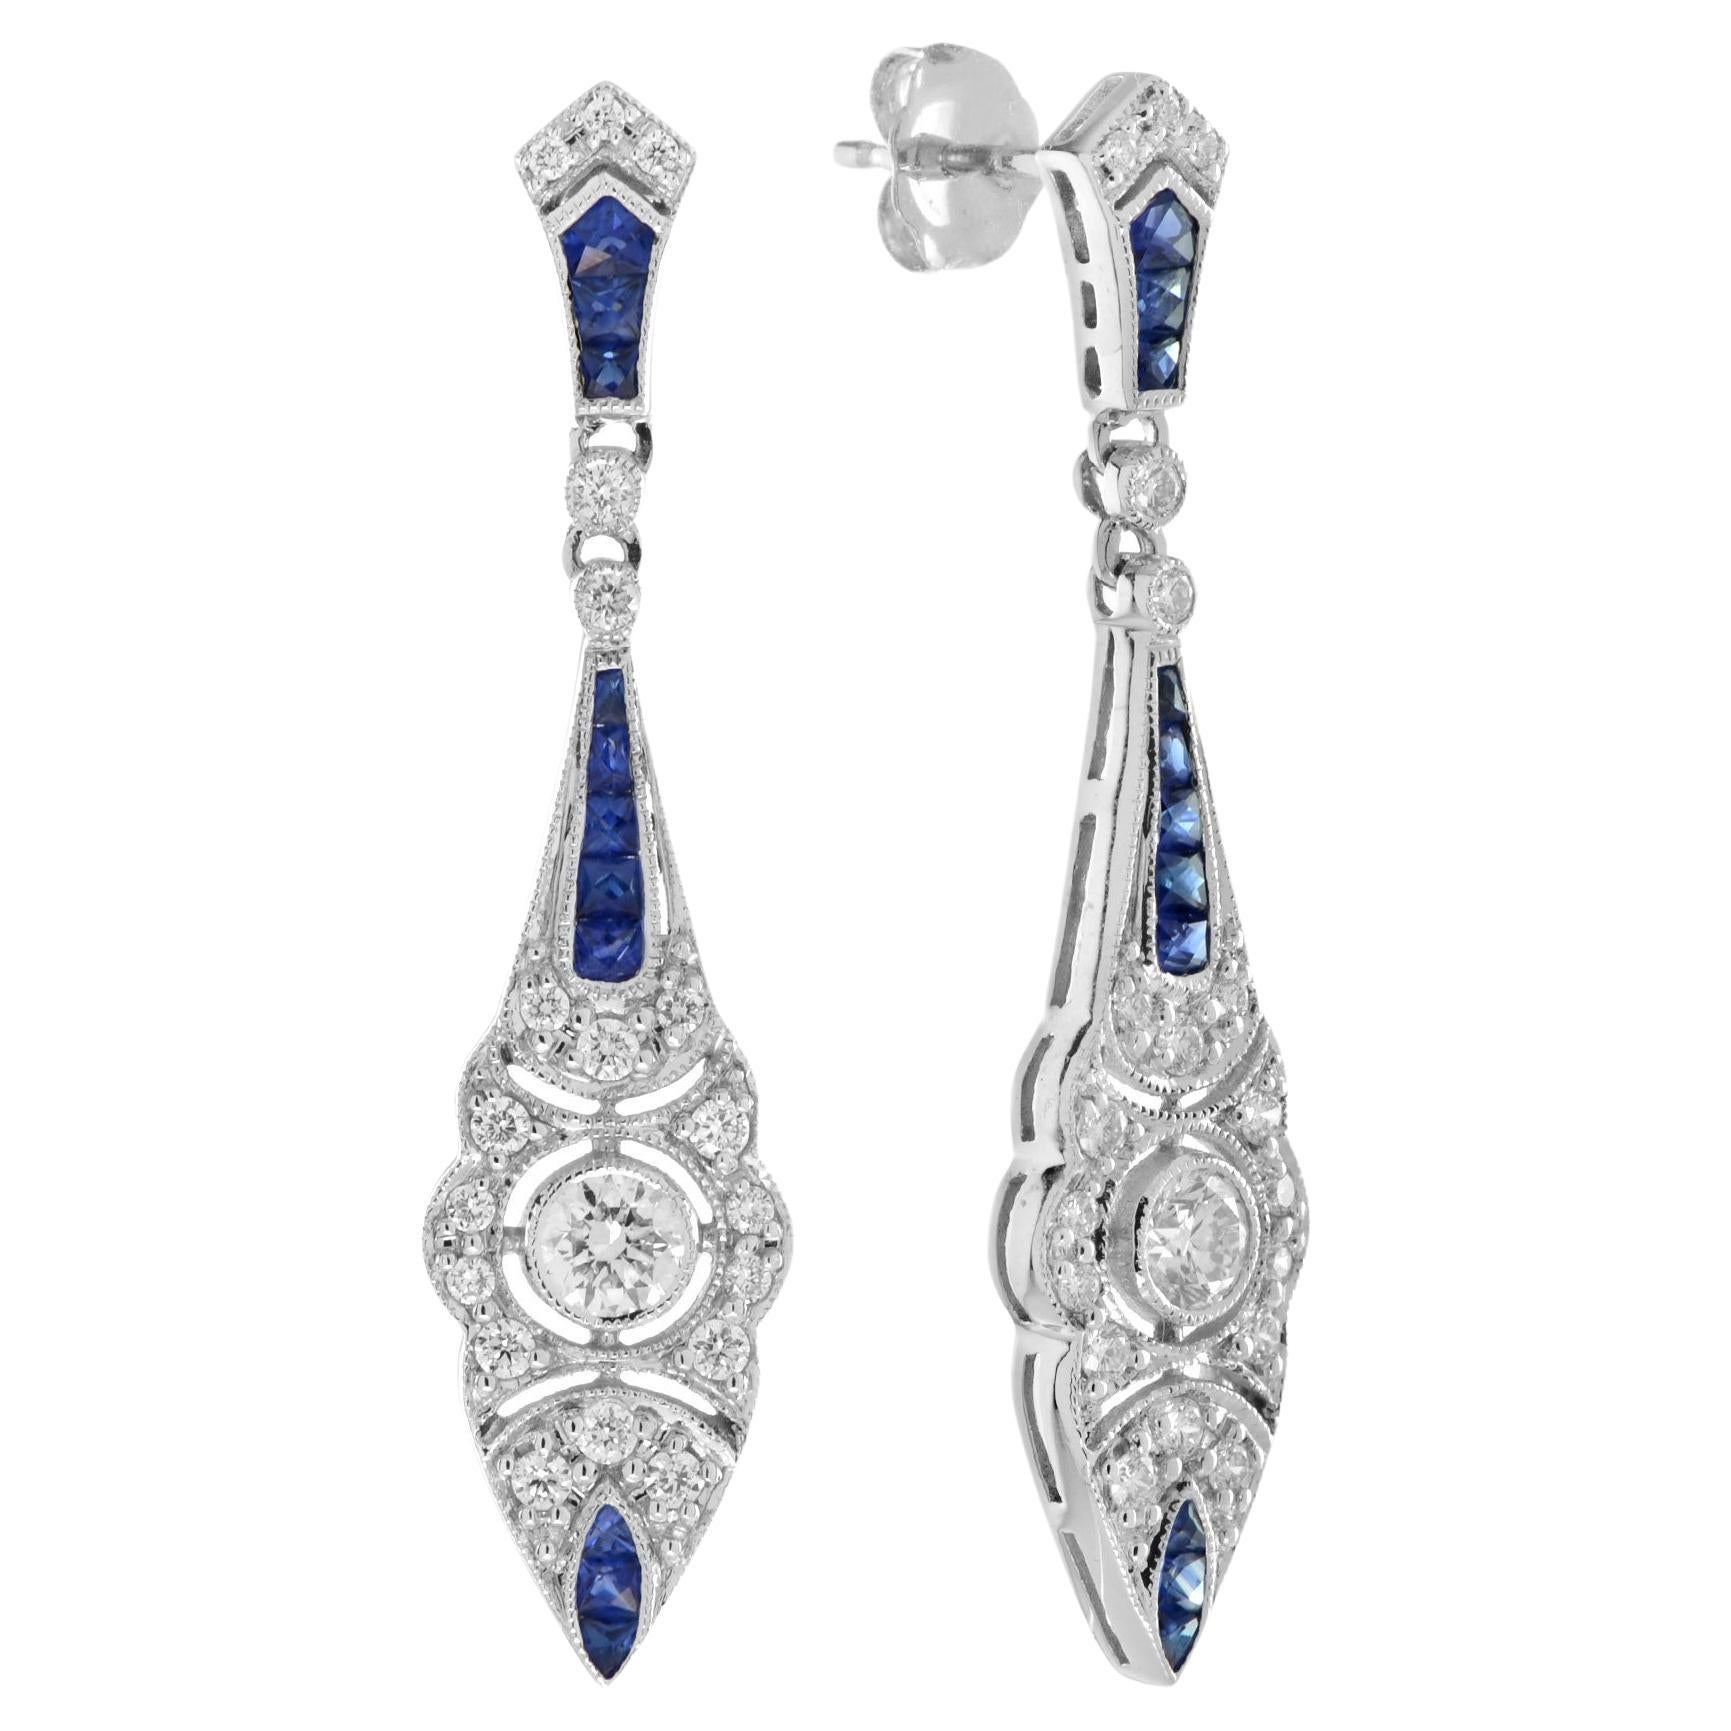 Art Deco Style Diamond and Sapphire Drop Earrings in 18K White Gold